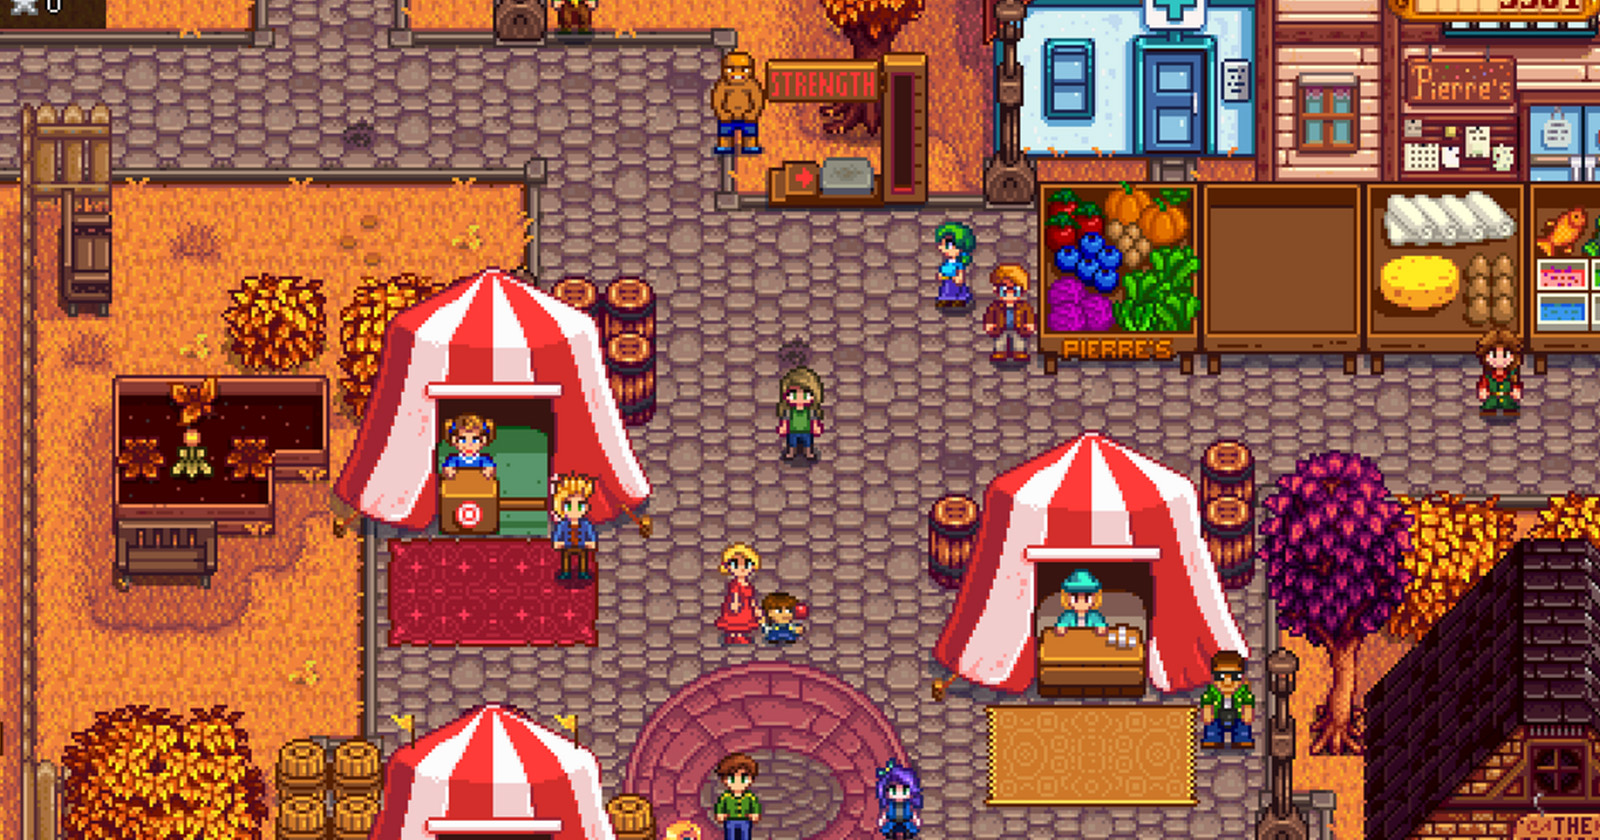 The date for the giant Stardew Valley update has been announced!